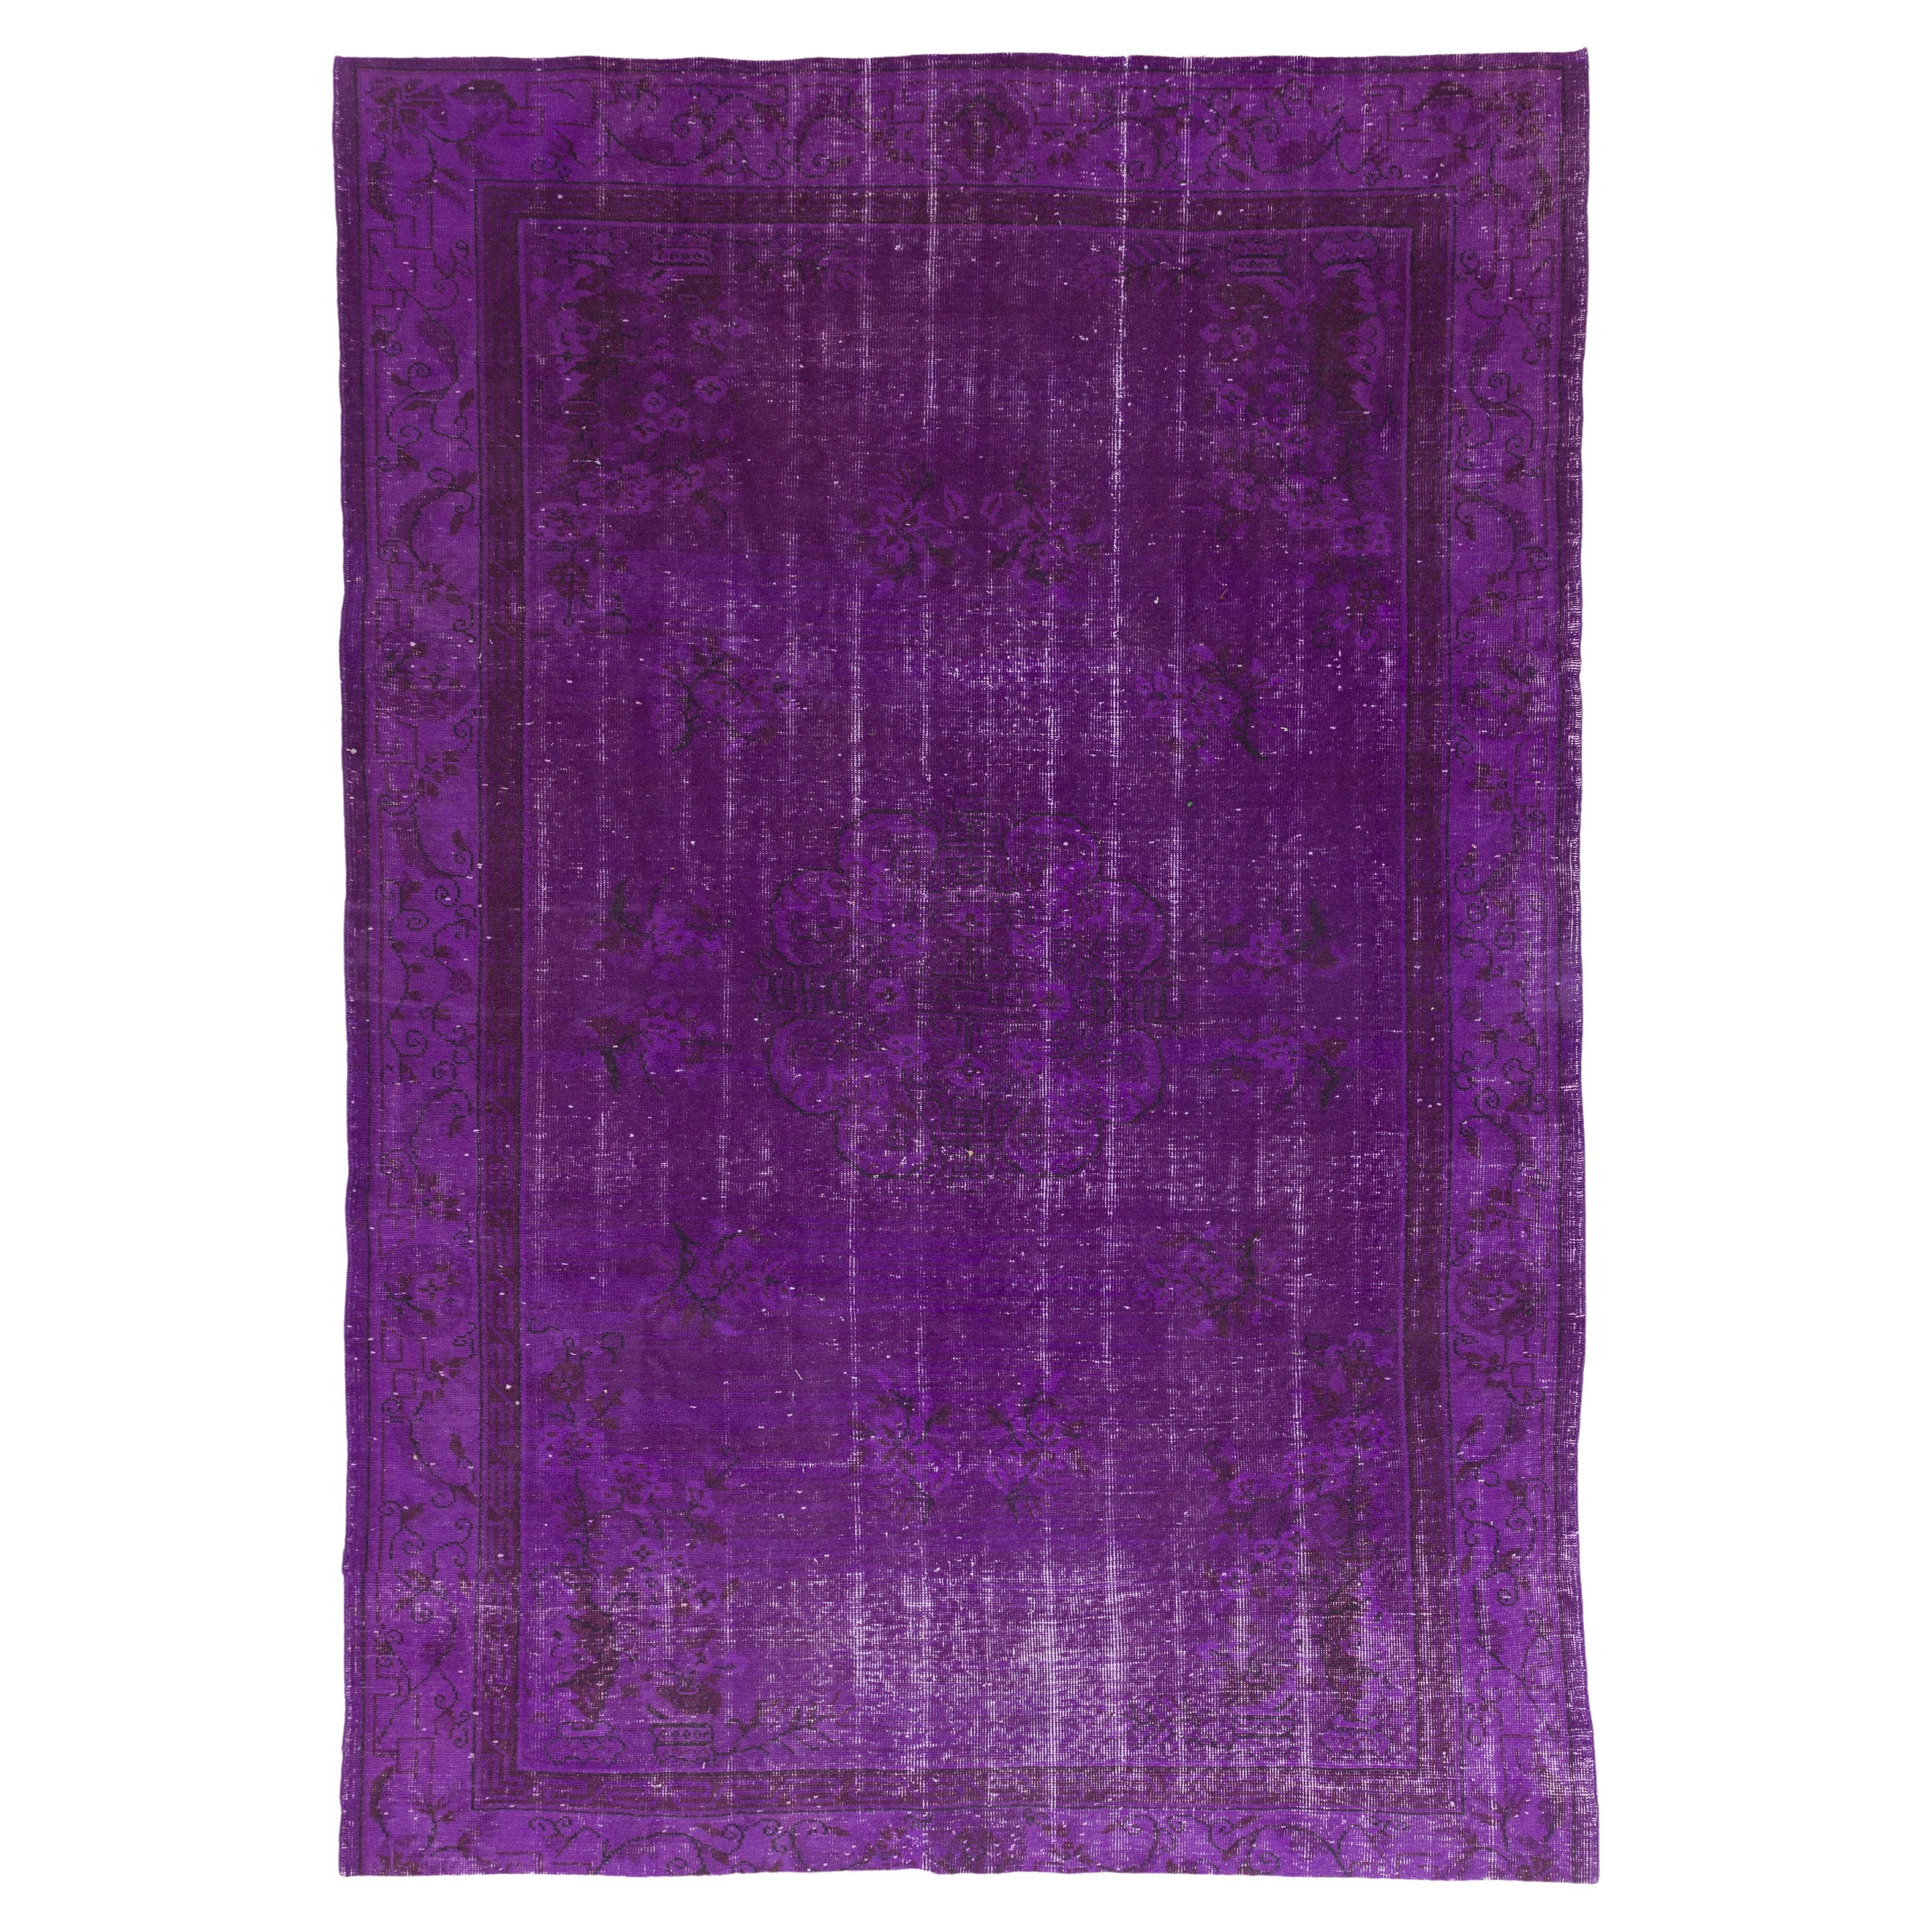 6.2x9.4 Ft Vintage Art Deco Rug Over-Dyed in Purple, Ideal for Modern Interiors